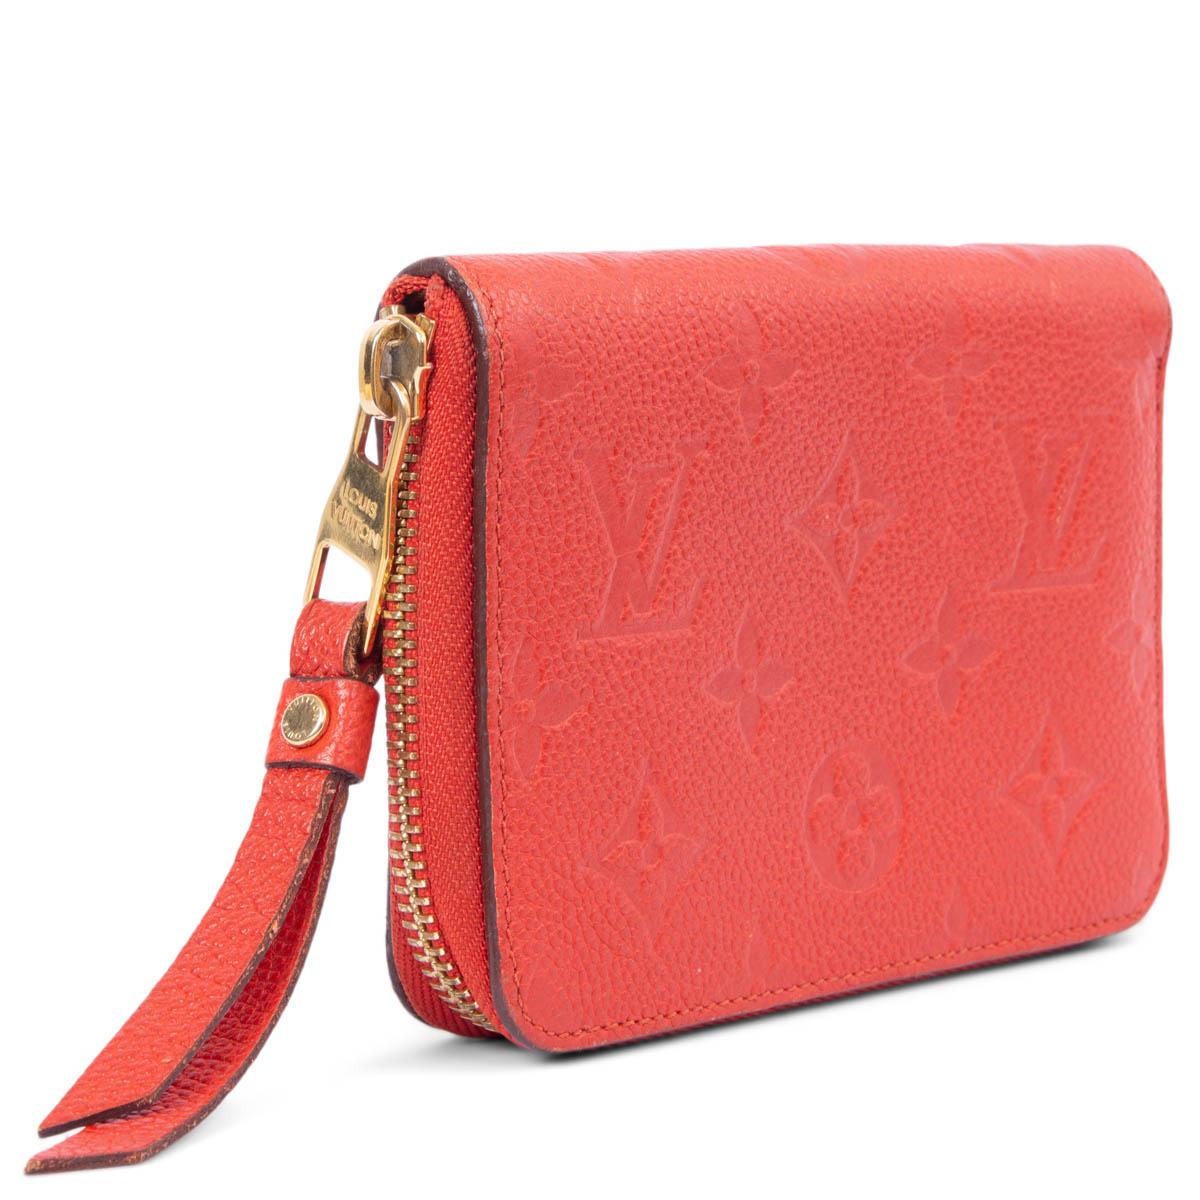 100% authentic Louis Vuitton Empreinte Secret Compact Wallet in Orient red grained calfskin featuring gold-tone hardware. Opens with a zipper on top and is lined in red calfskin with three credit card slots, a zipped coin-pocket and a large bill